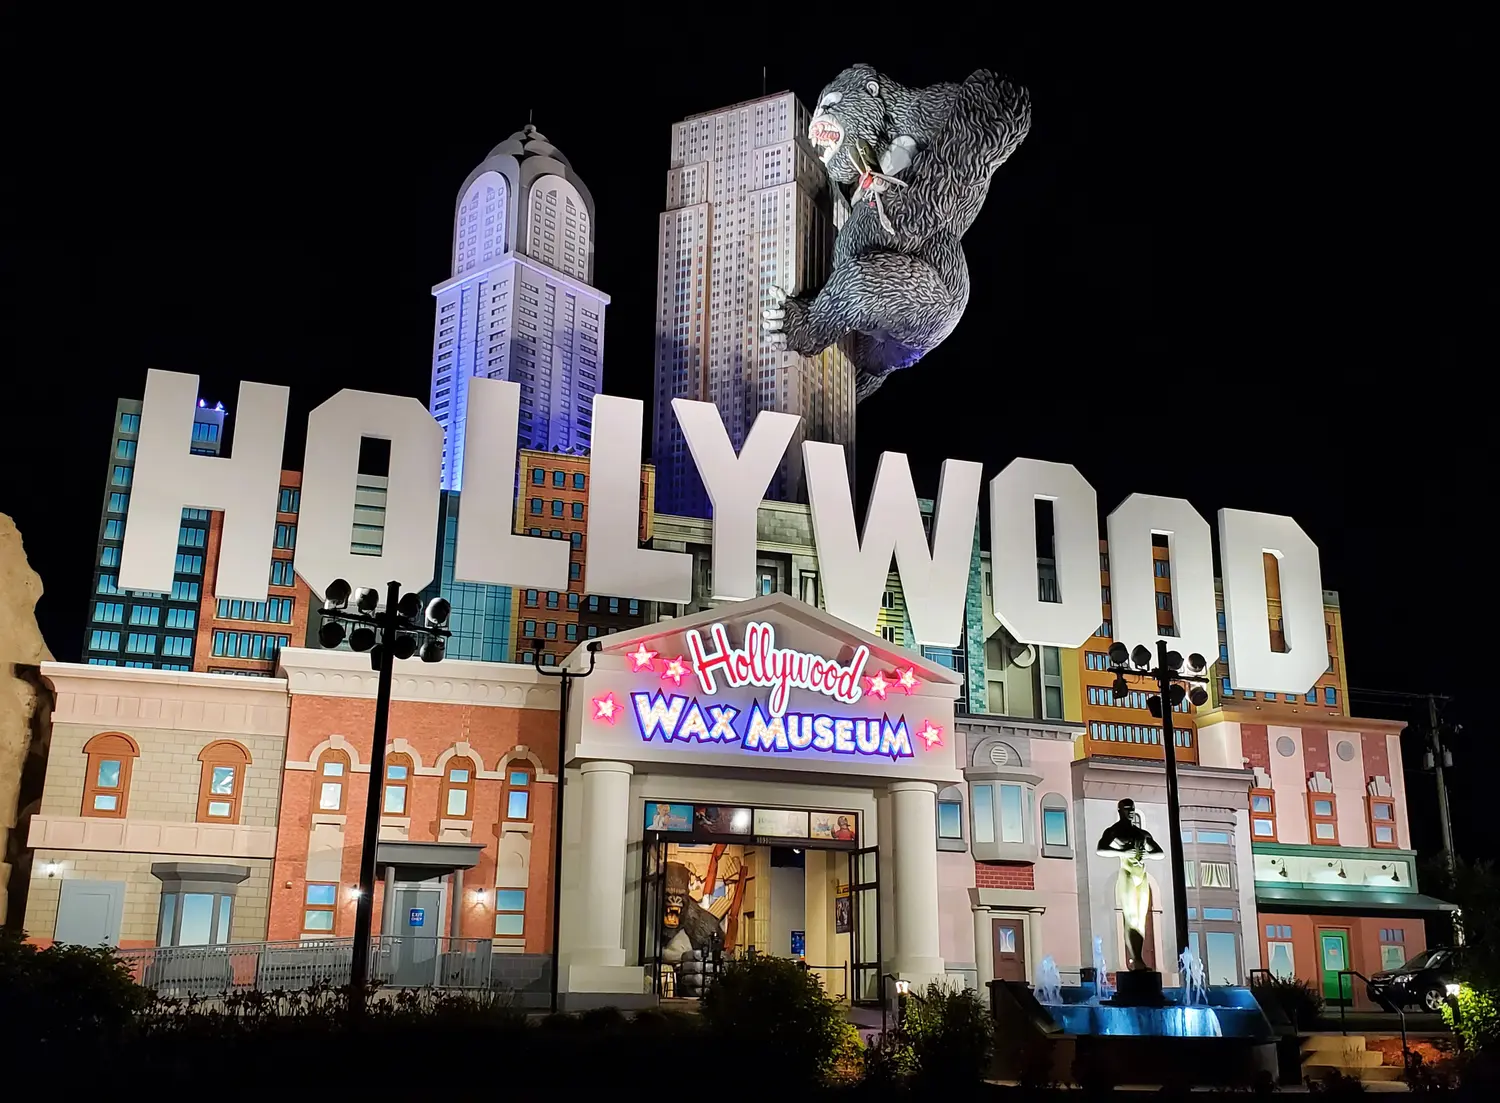 The Hollywood Wax Museum building illuminated at night.